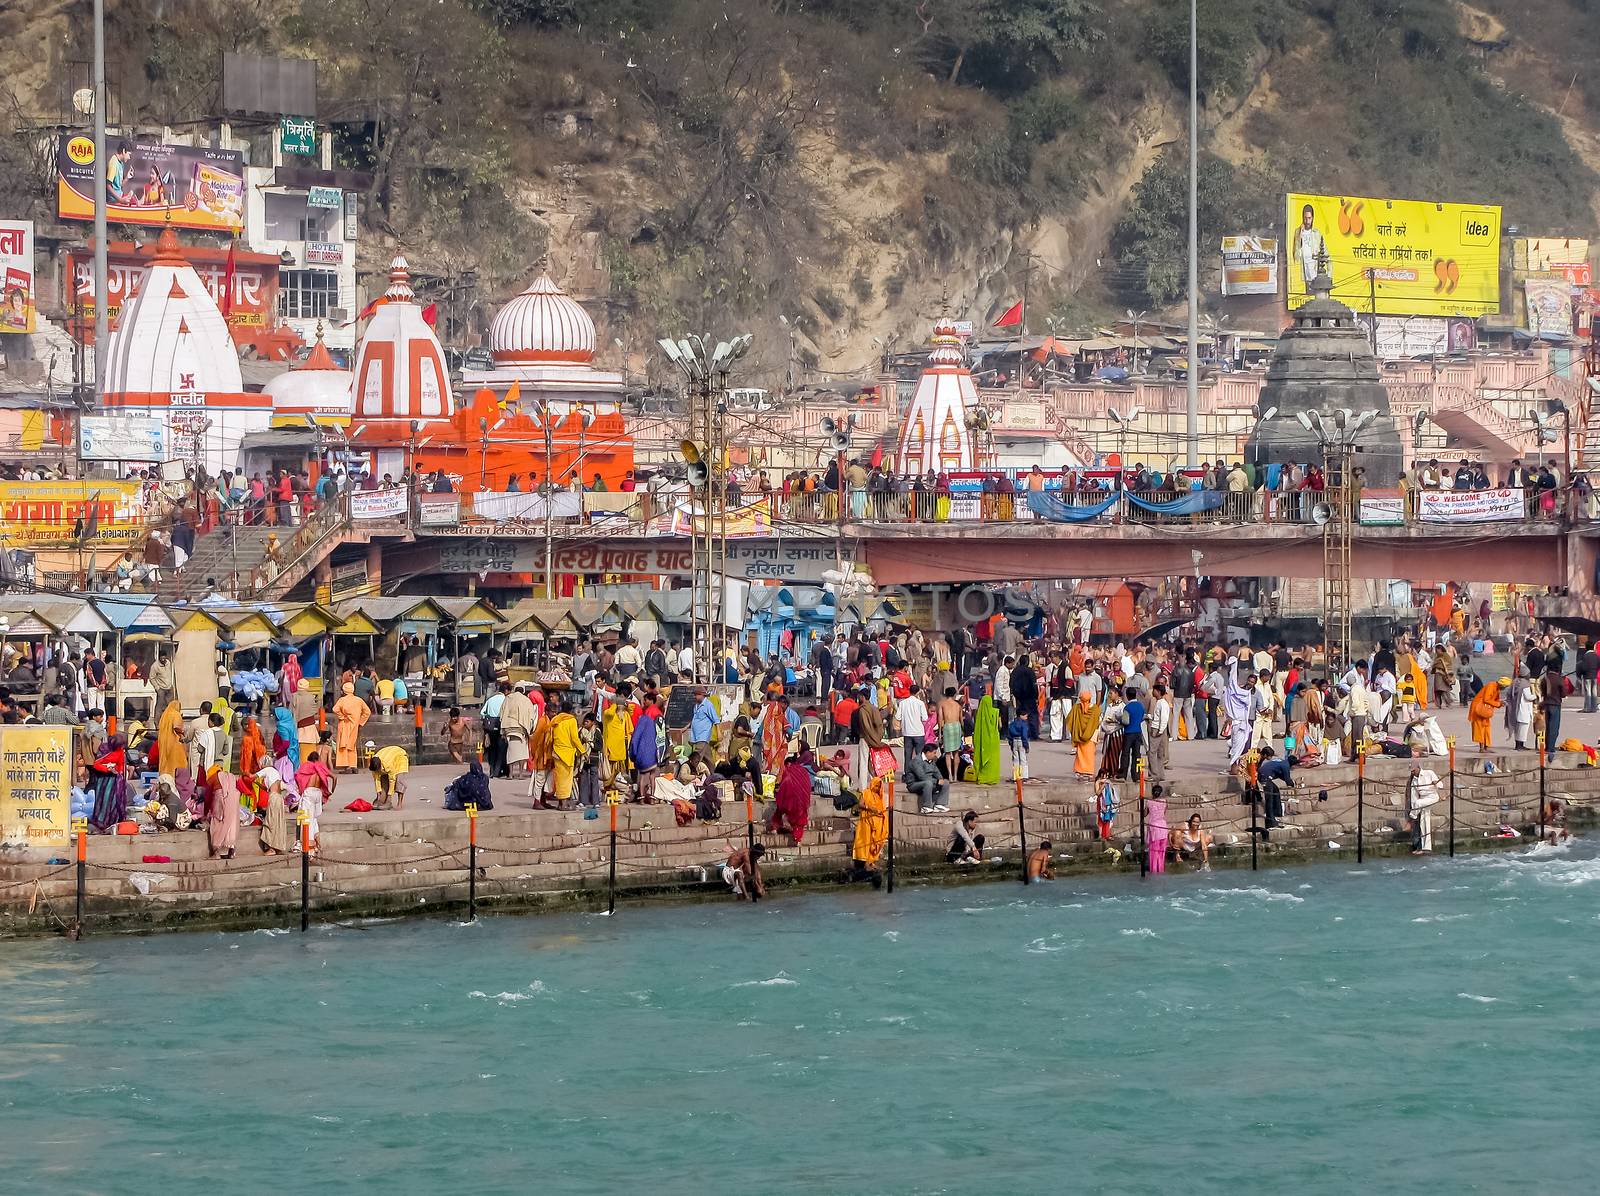 Crowd taking bath in Ganges & performing rituals at Ganga Ghat by lalam